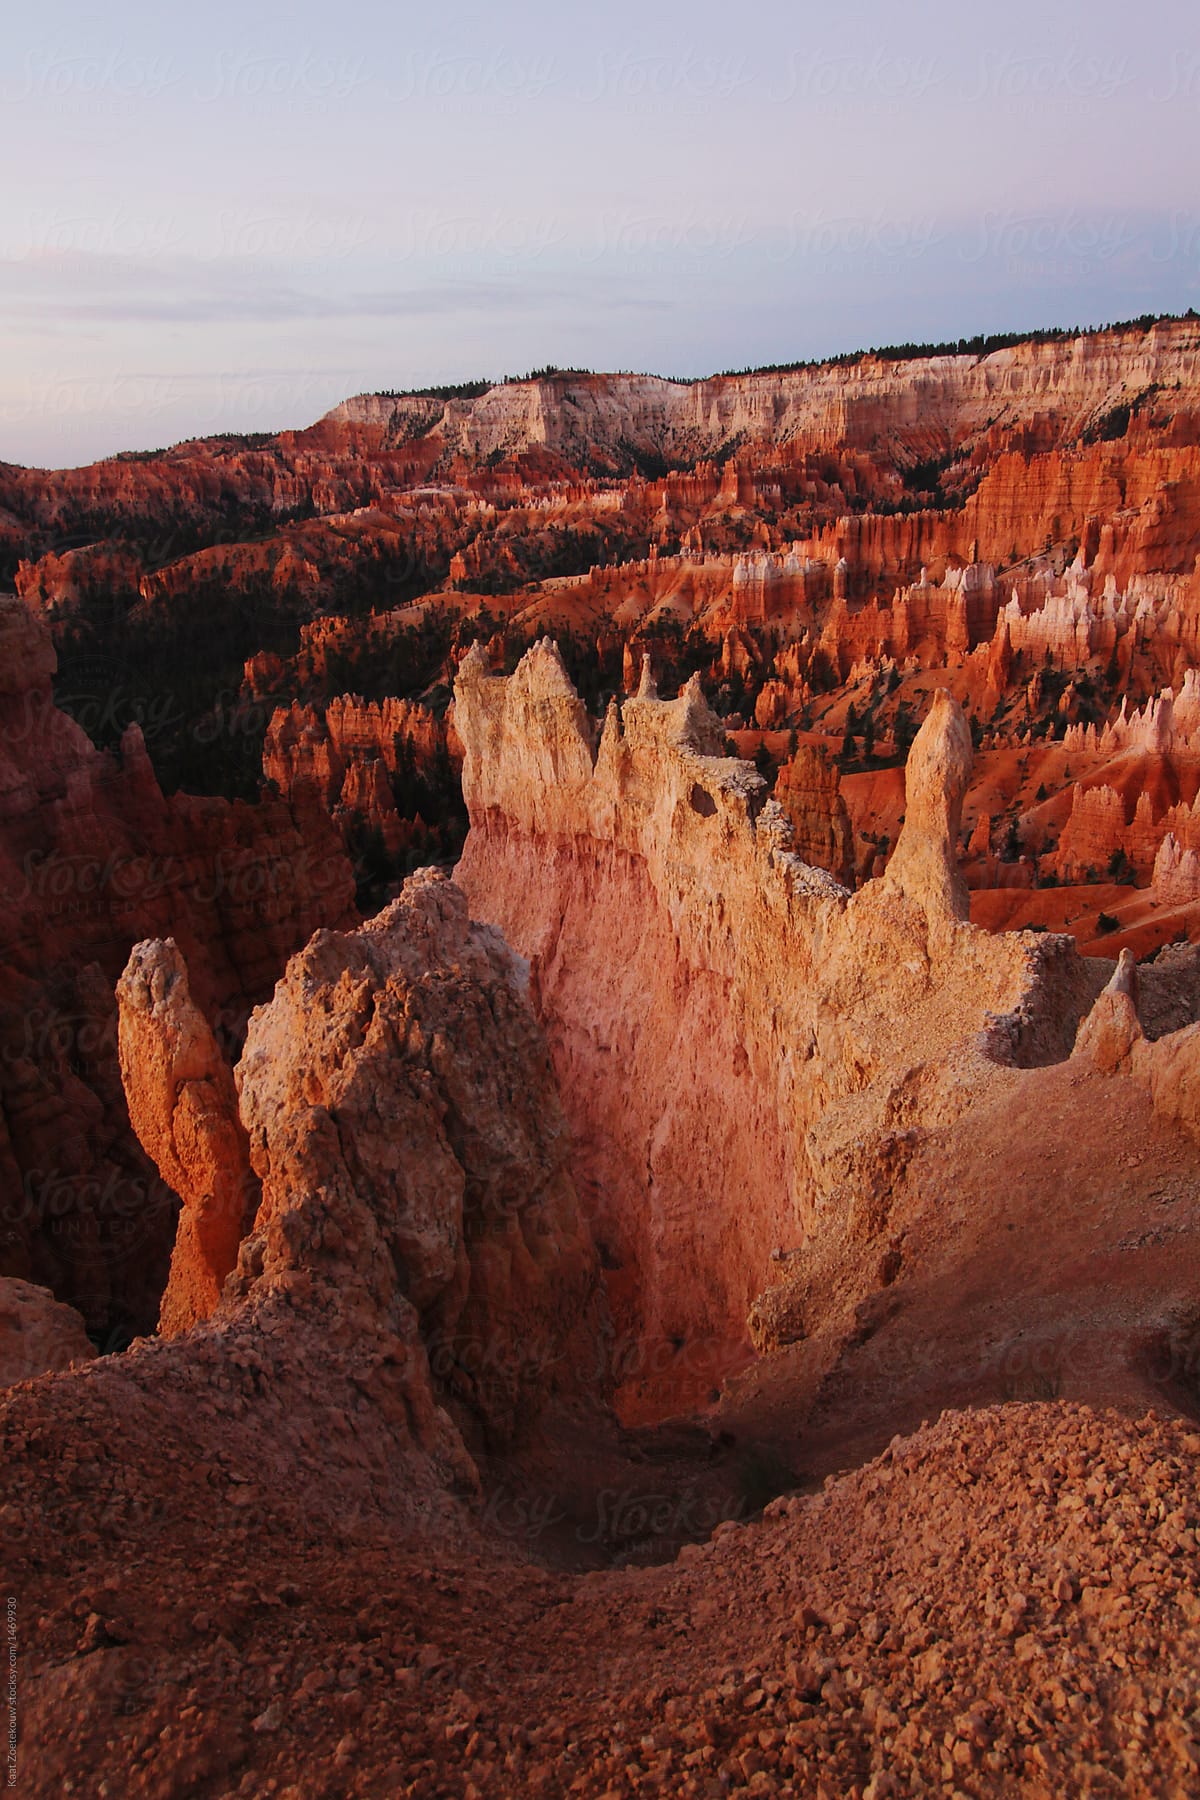 First light of sunrise begins to light up the landscape of Bryce Canyon national park.